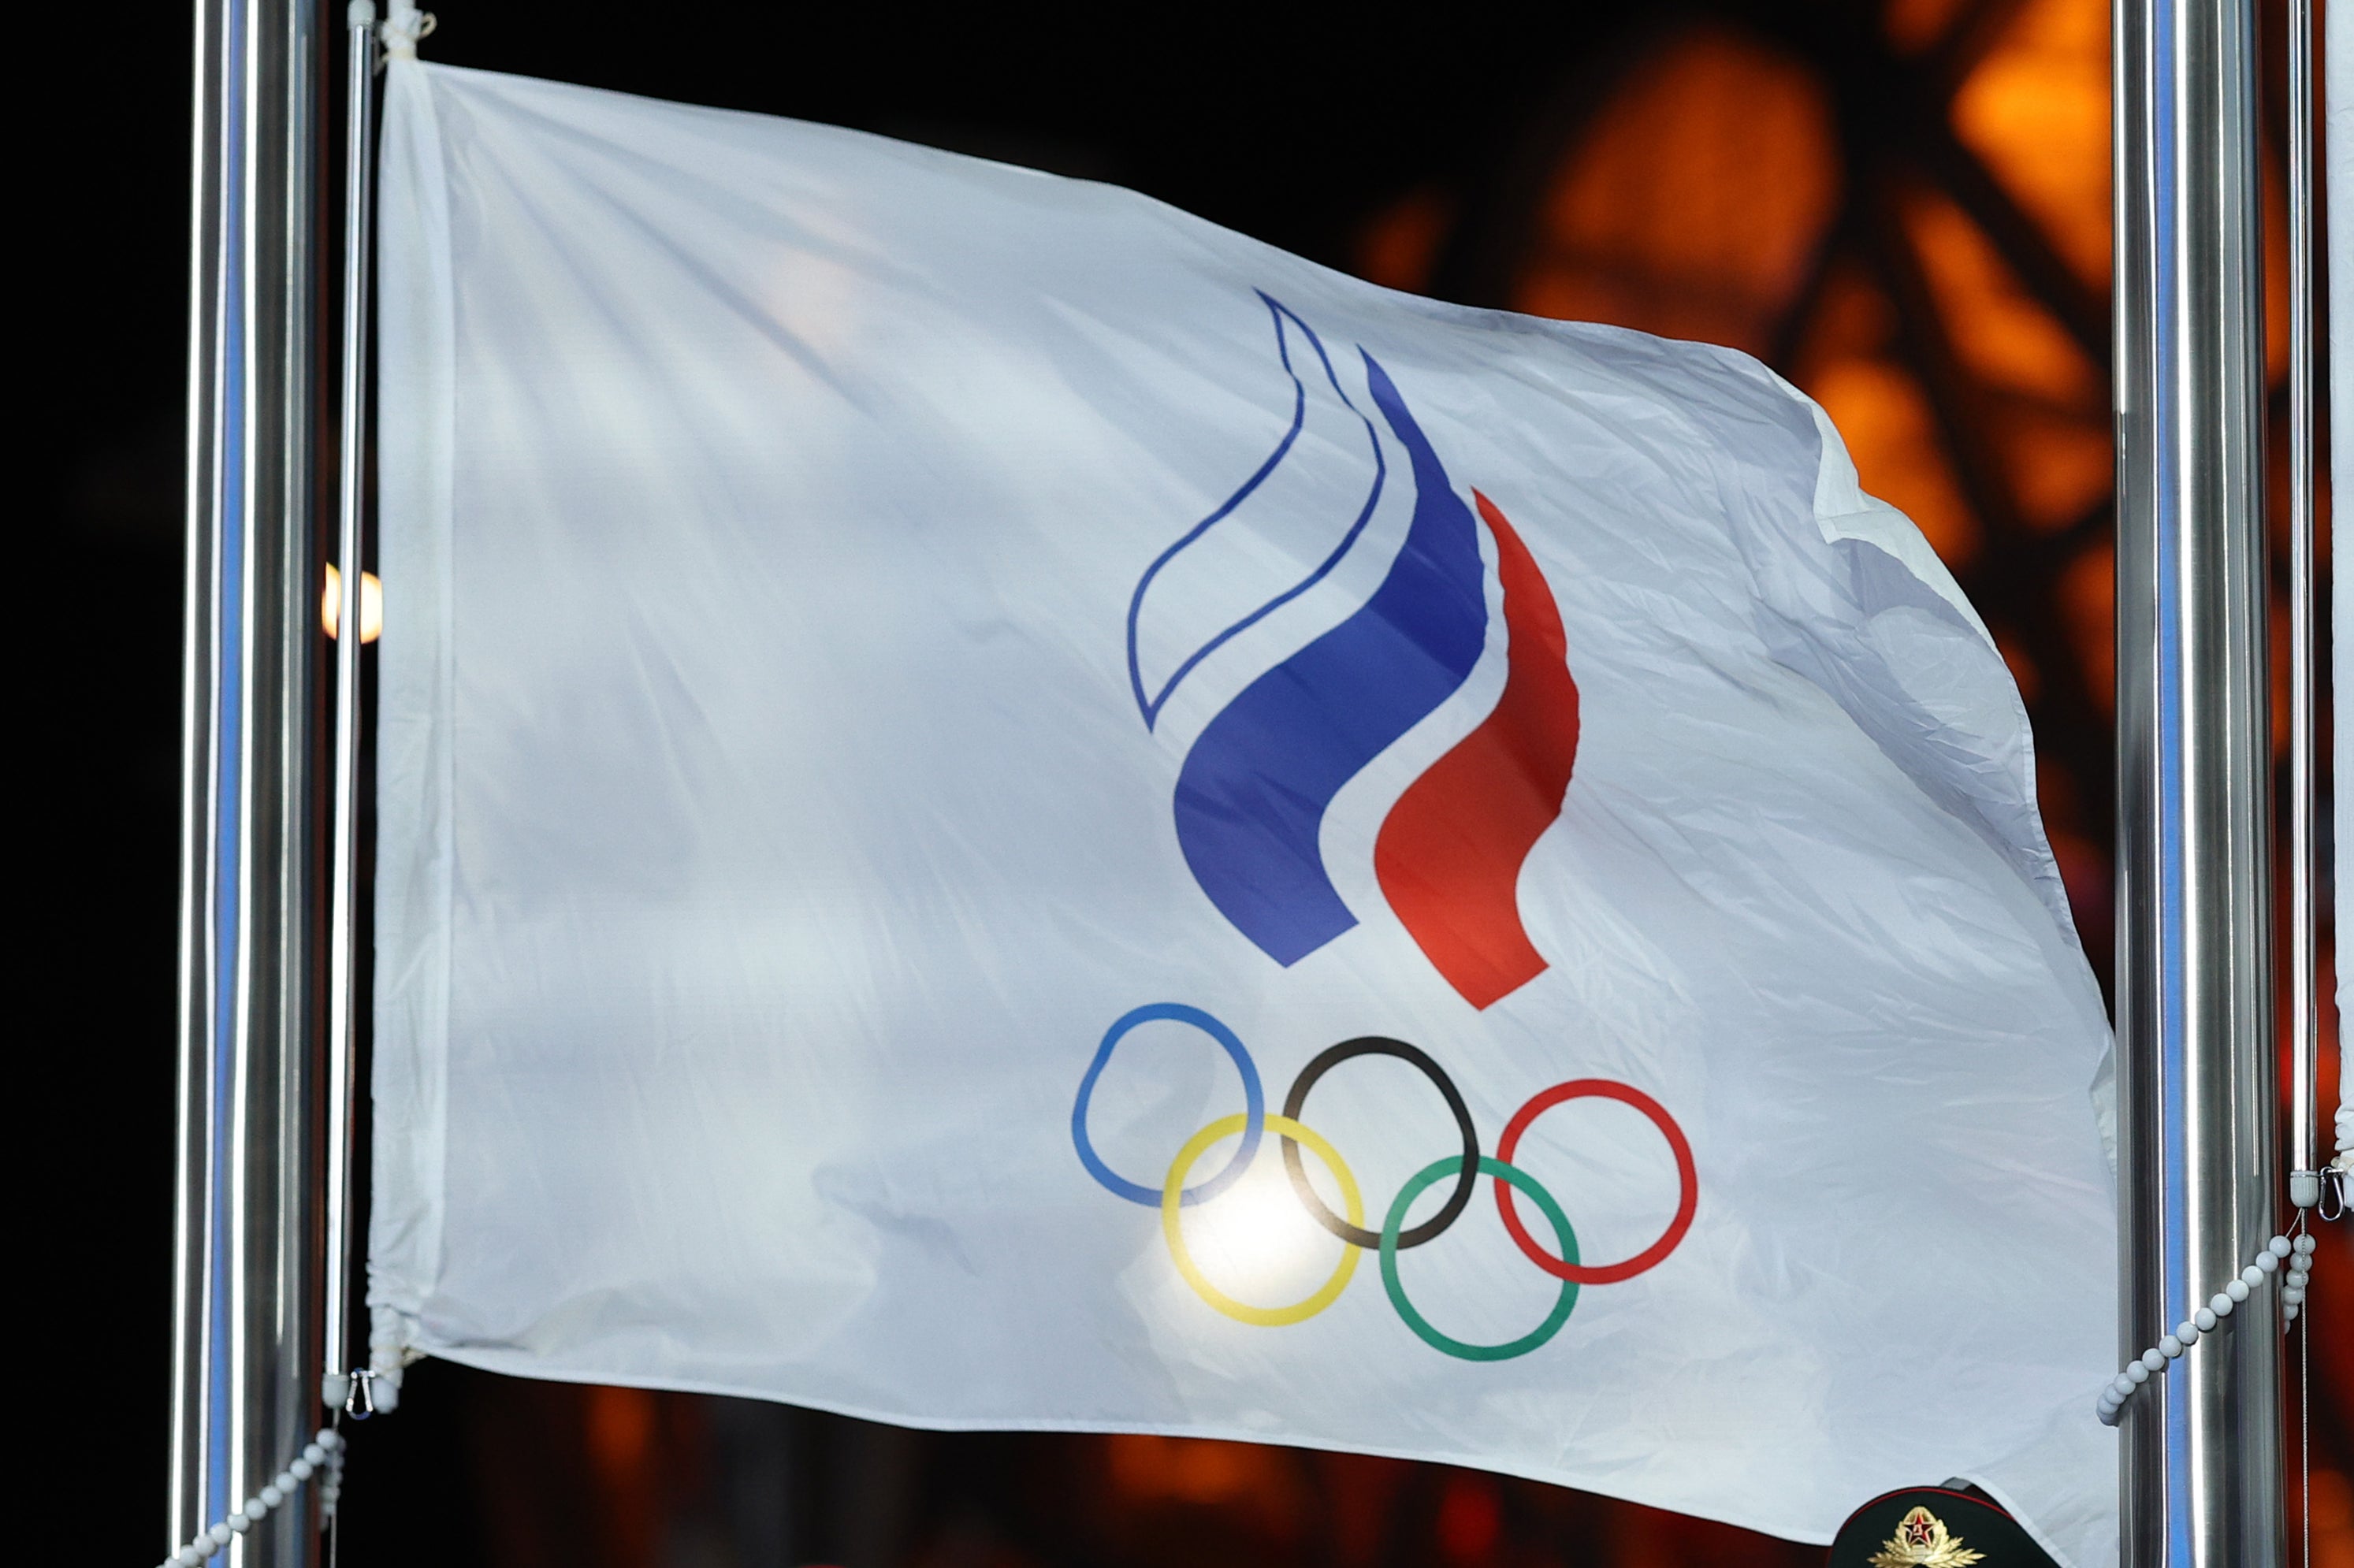 Russians look set to compete at next year’s Paris Olympics under a neutral flag after the invasion of Ukraine